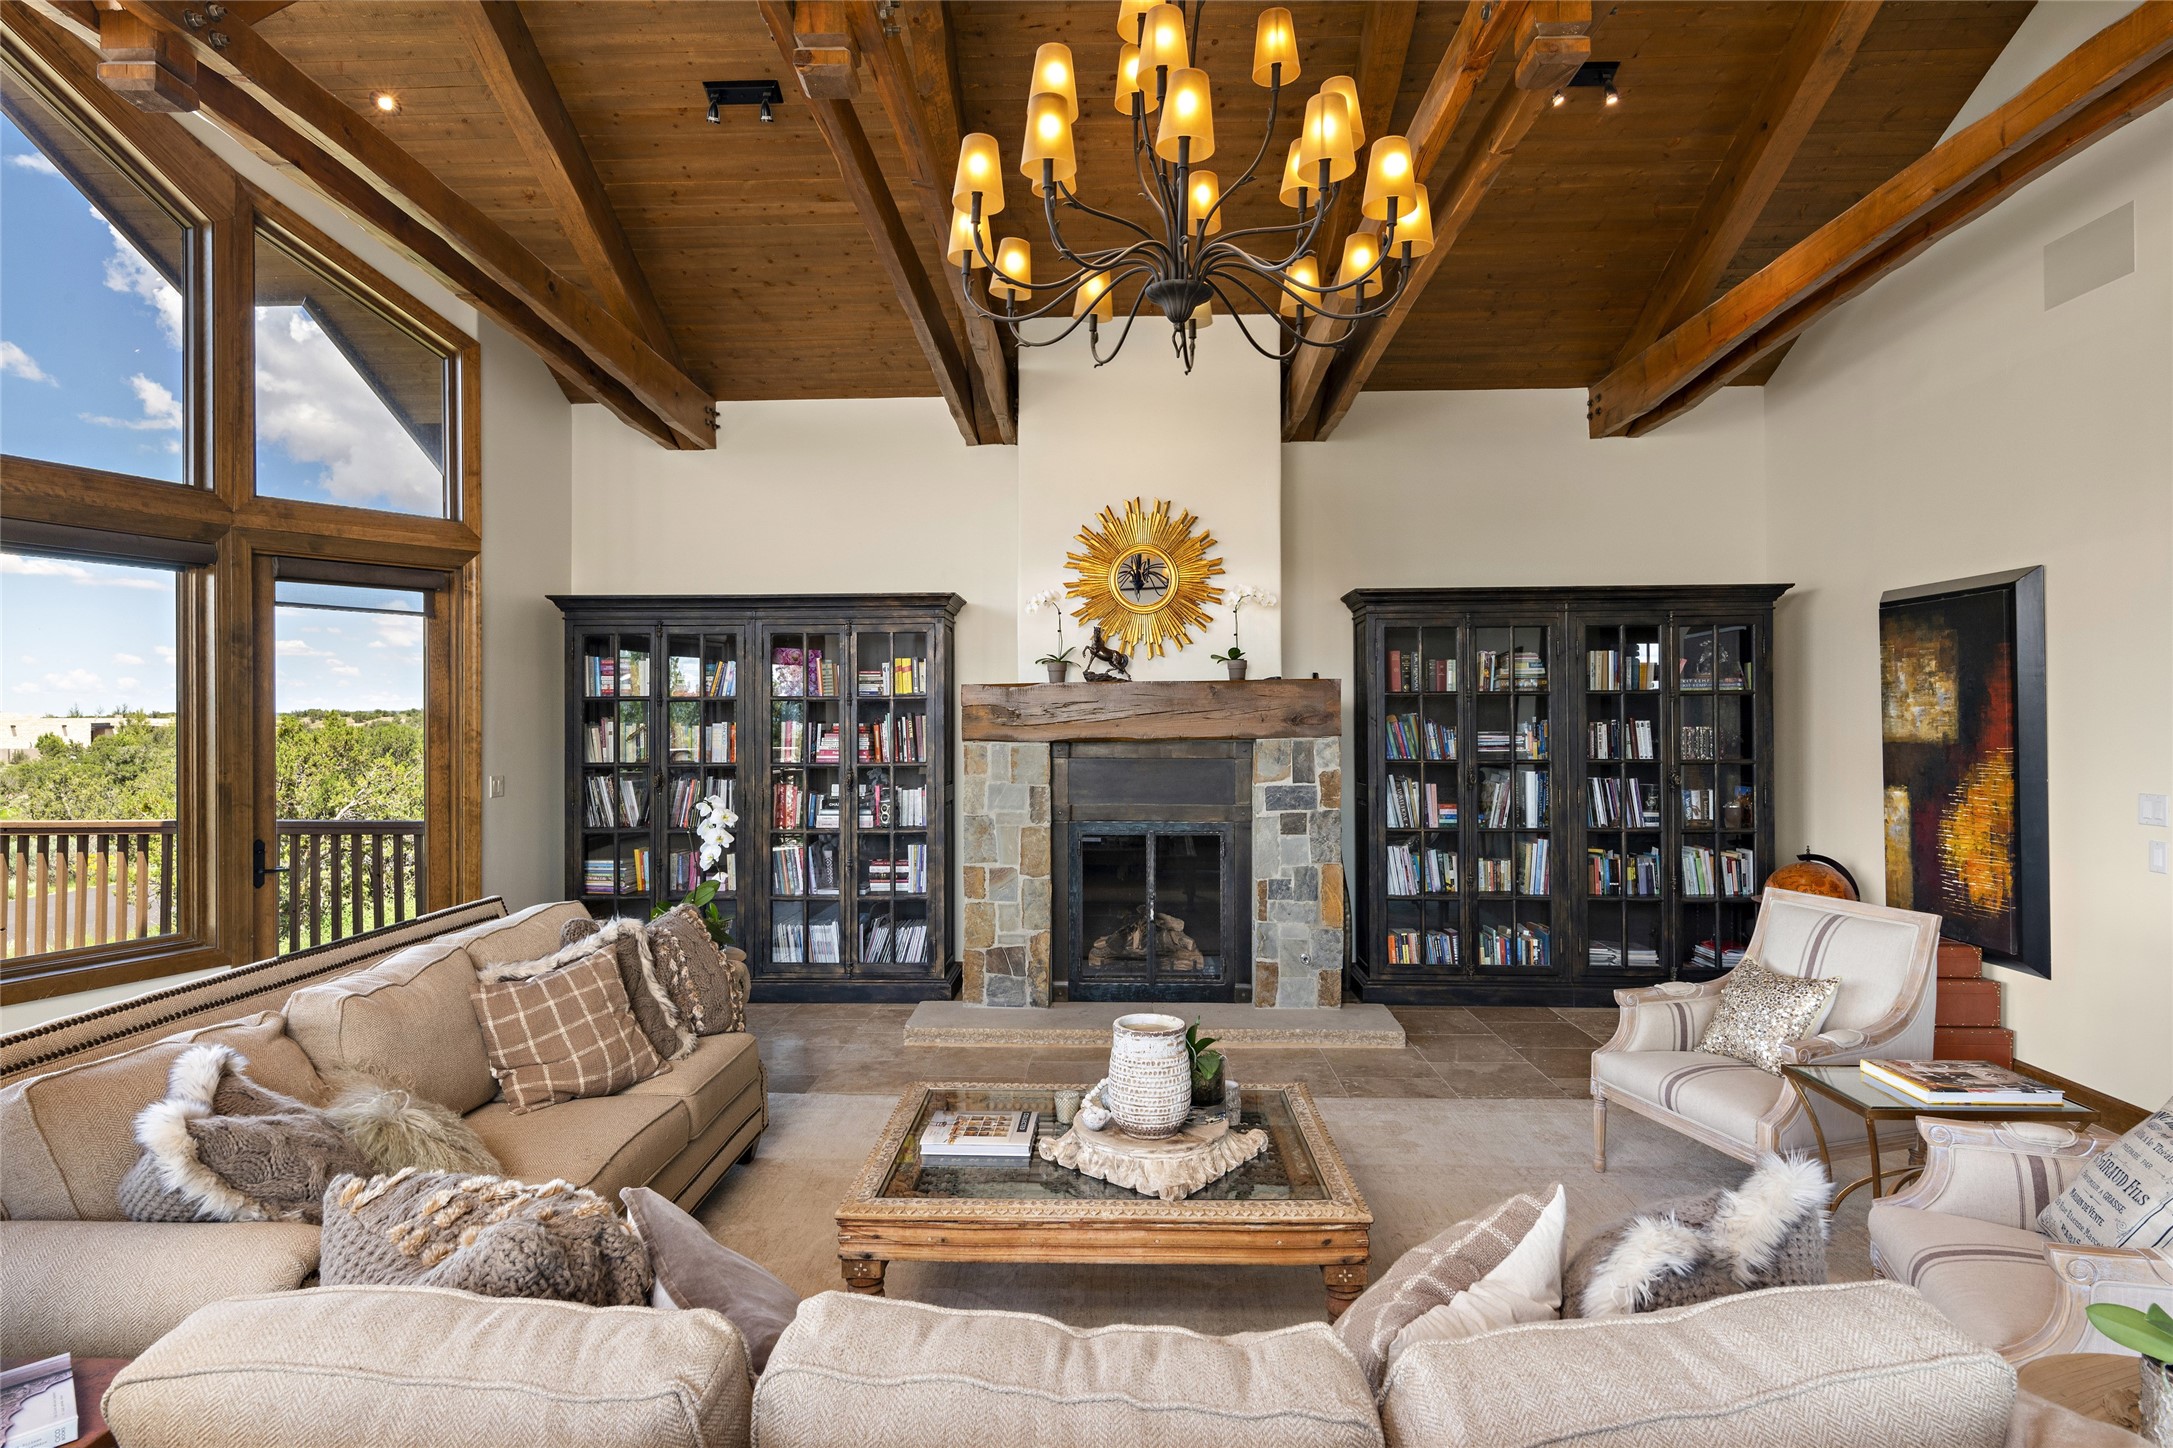 Living Room with Vaulted Ceiling and Exposed Beams